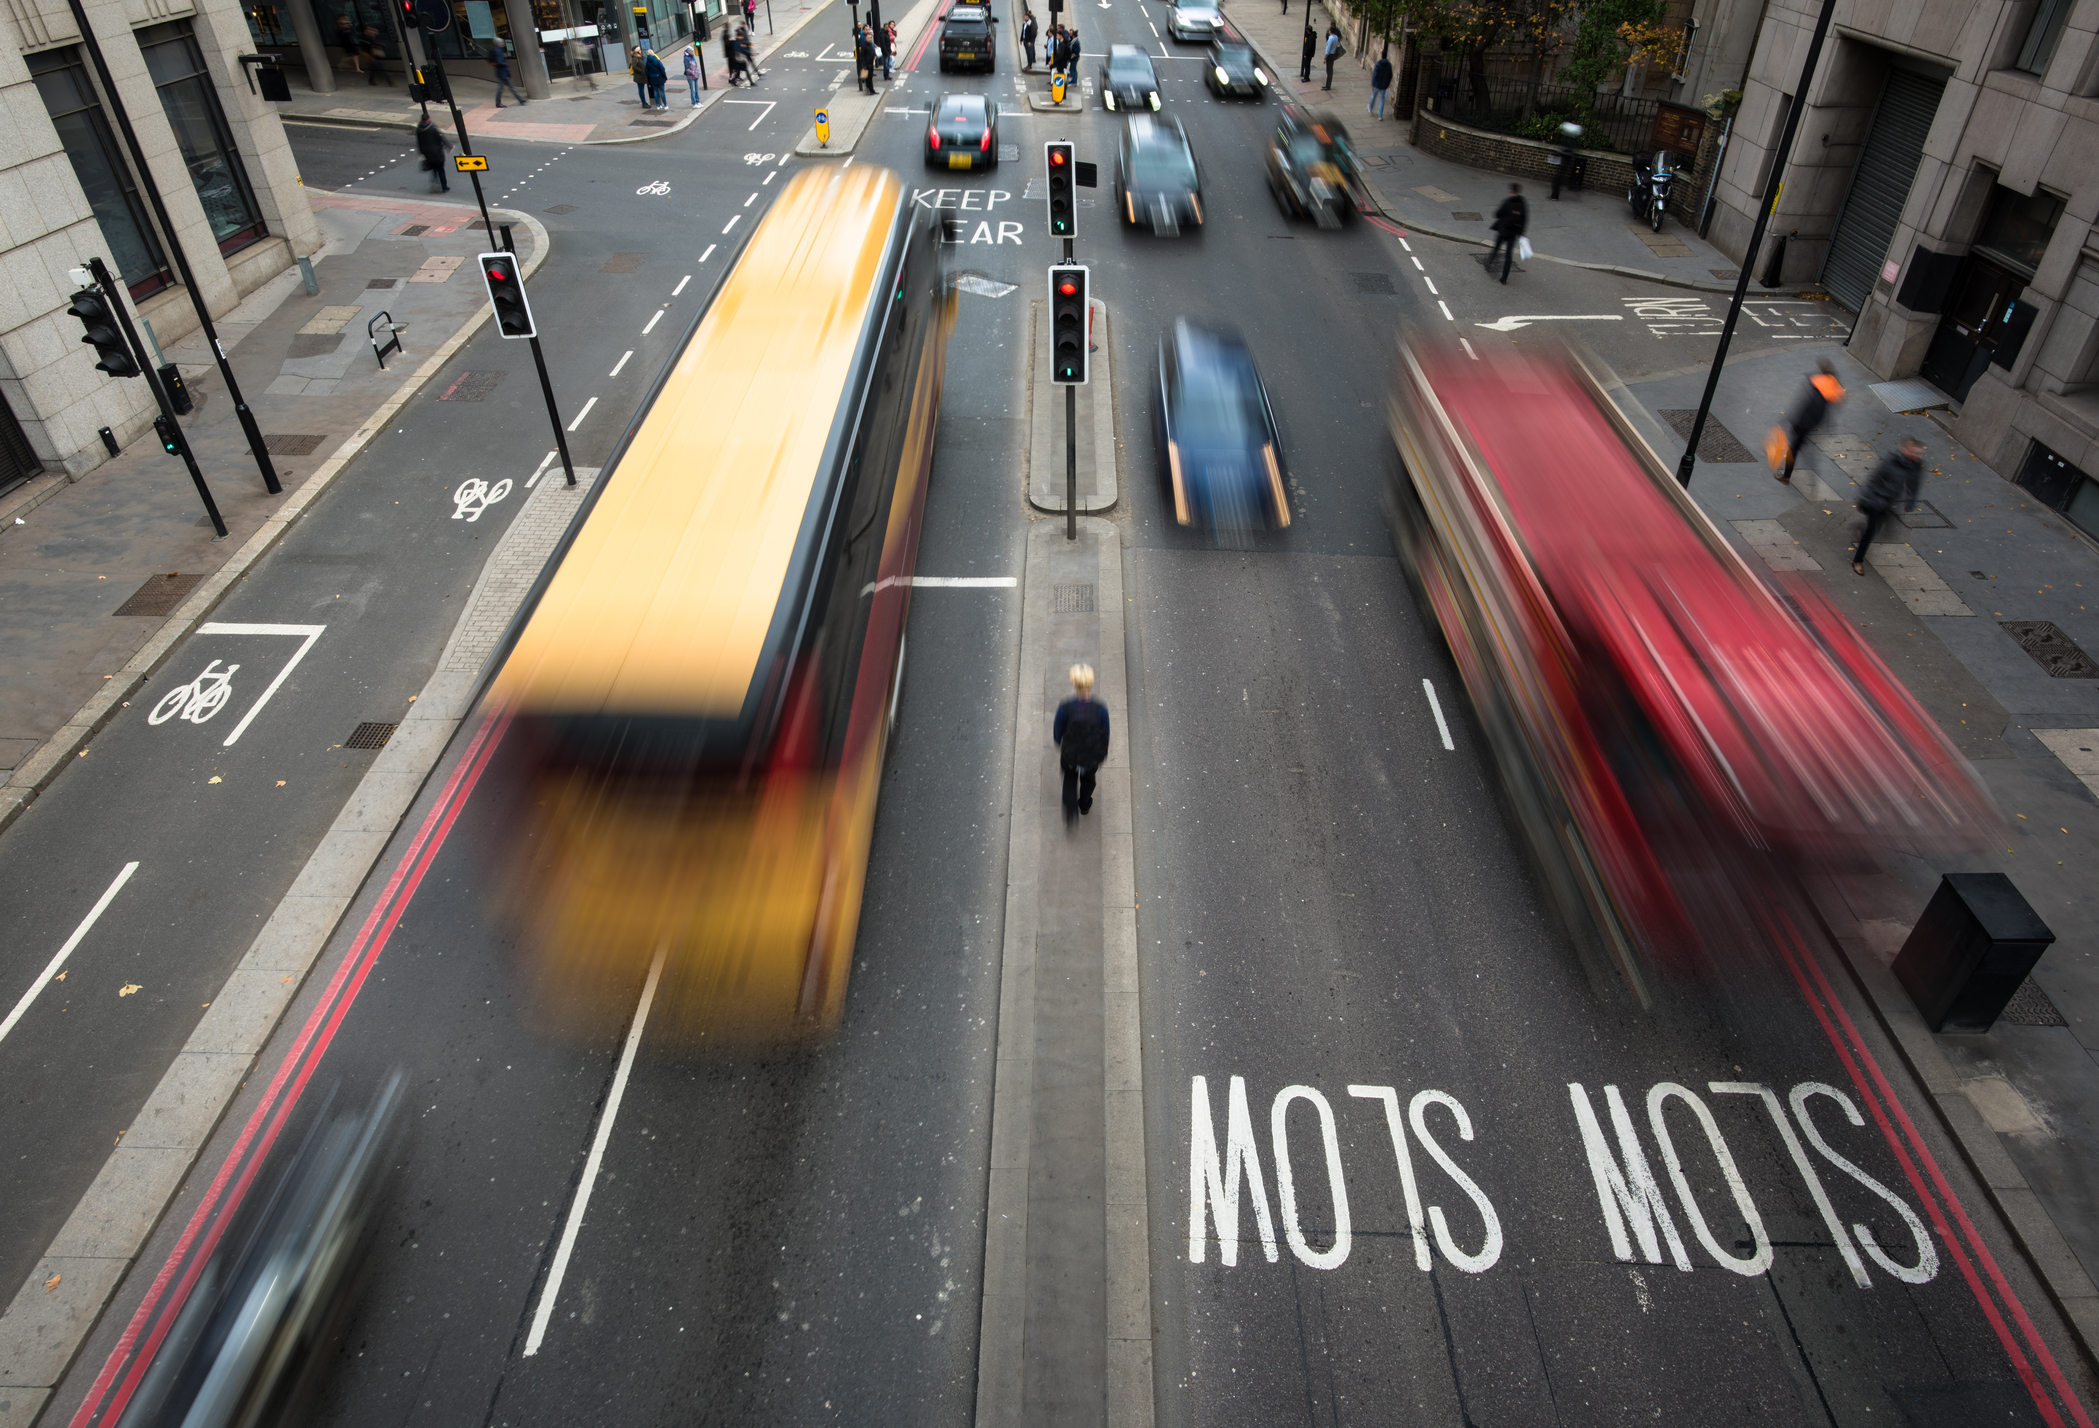 High Angle View of Blurred Vehicles and Man Walking between Traffic on a Busy City Street. London. UK.